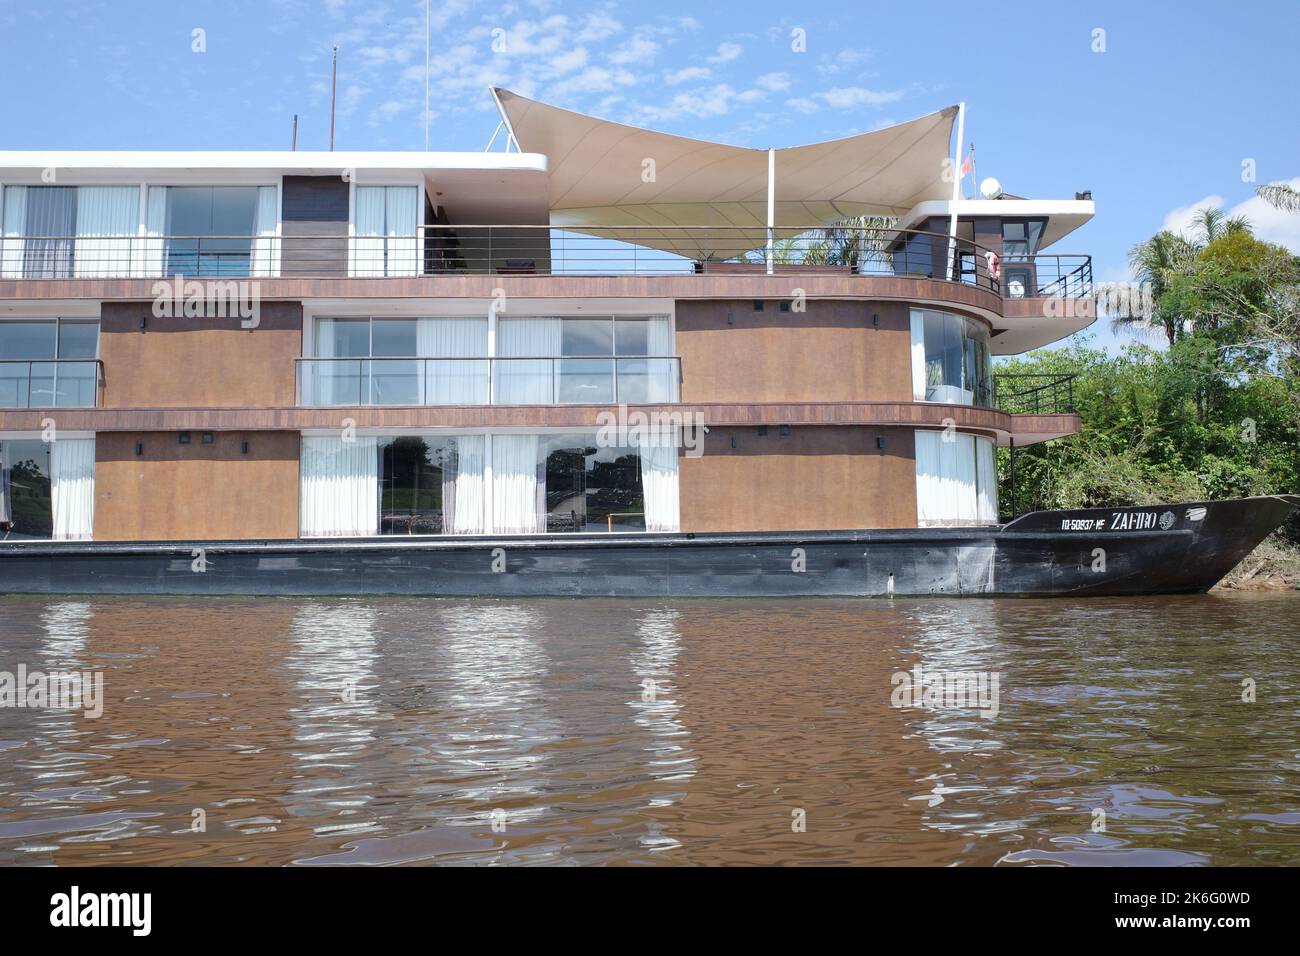 Iquitos, Peru - 27 June 2022: A cruise boat on the Amazon river near the port of Iquitos, Peru Stock Photo